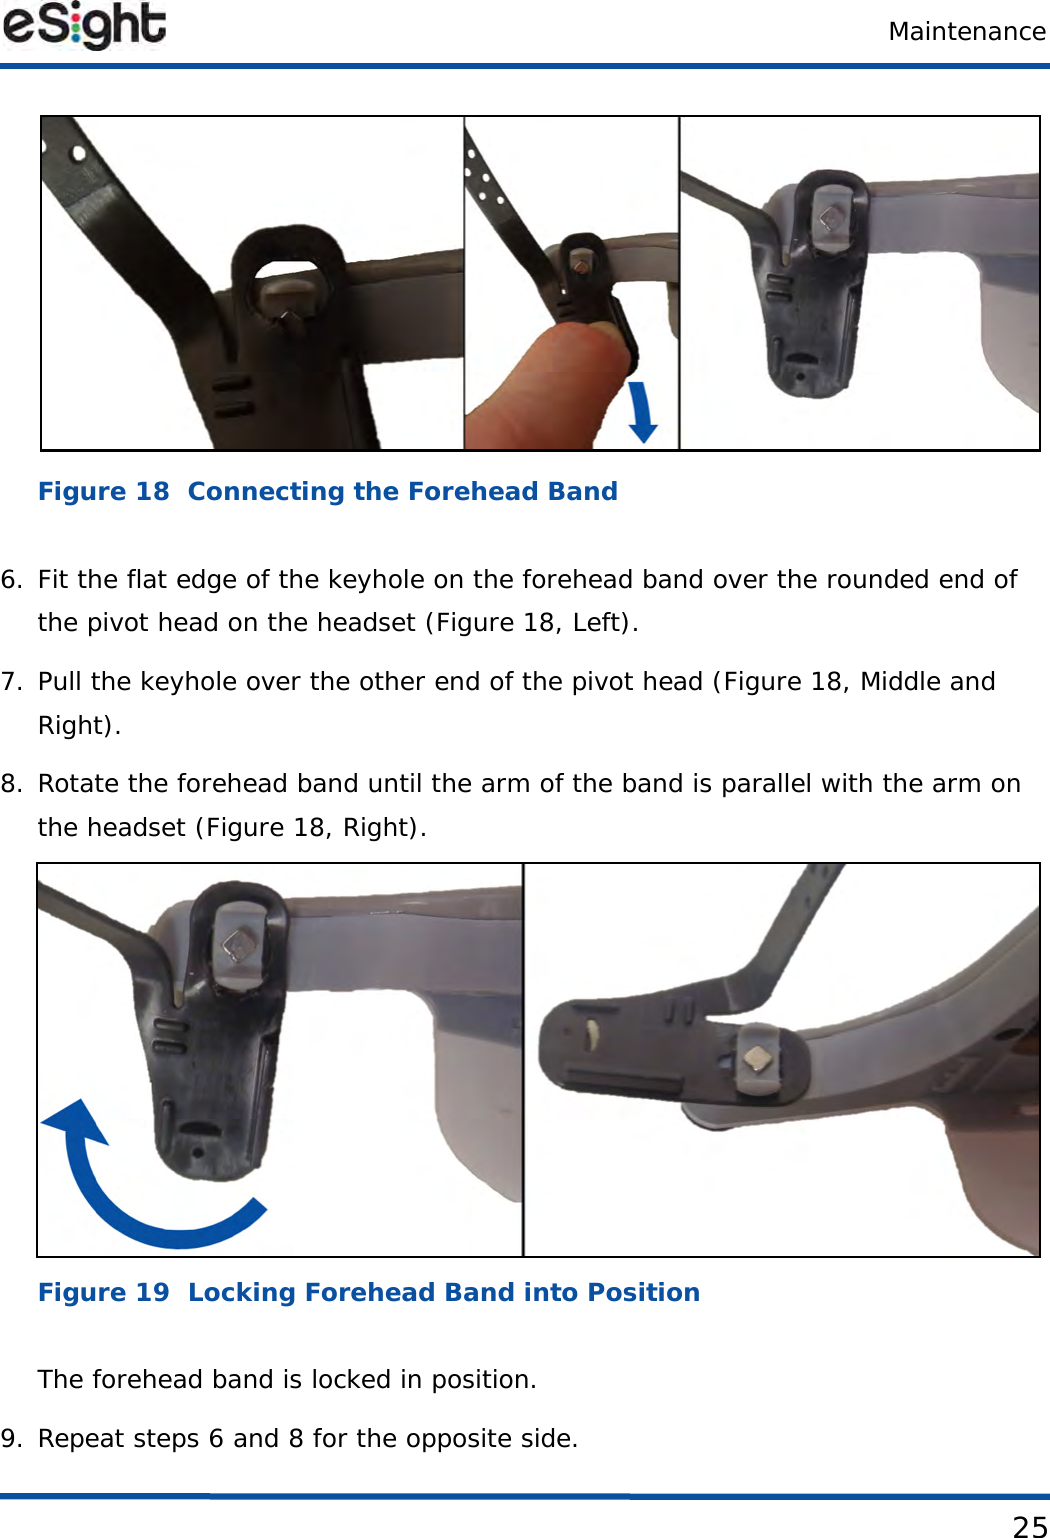 Maintenance25Figure 18  Connecting the Forehead Band6. Fit the flat edge of the keyhole on the forehead band over the rounded end of the pivot head on the headset (Figure 18, Left).7. Pull the keyhole over the other end of the pivot head (Figure 18, Middle and Right).8. Rotate the forehead band until the arm of the band is parallel with the arm on the headset (Figure 18, Right).Figure 19  Locking Forehead Band into PositionThe forehead band is locked in position.9. Repeat steps 6 and 8 for the opposite side.